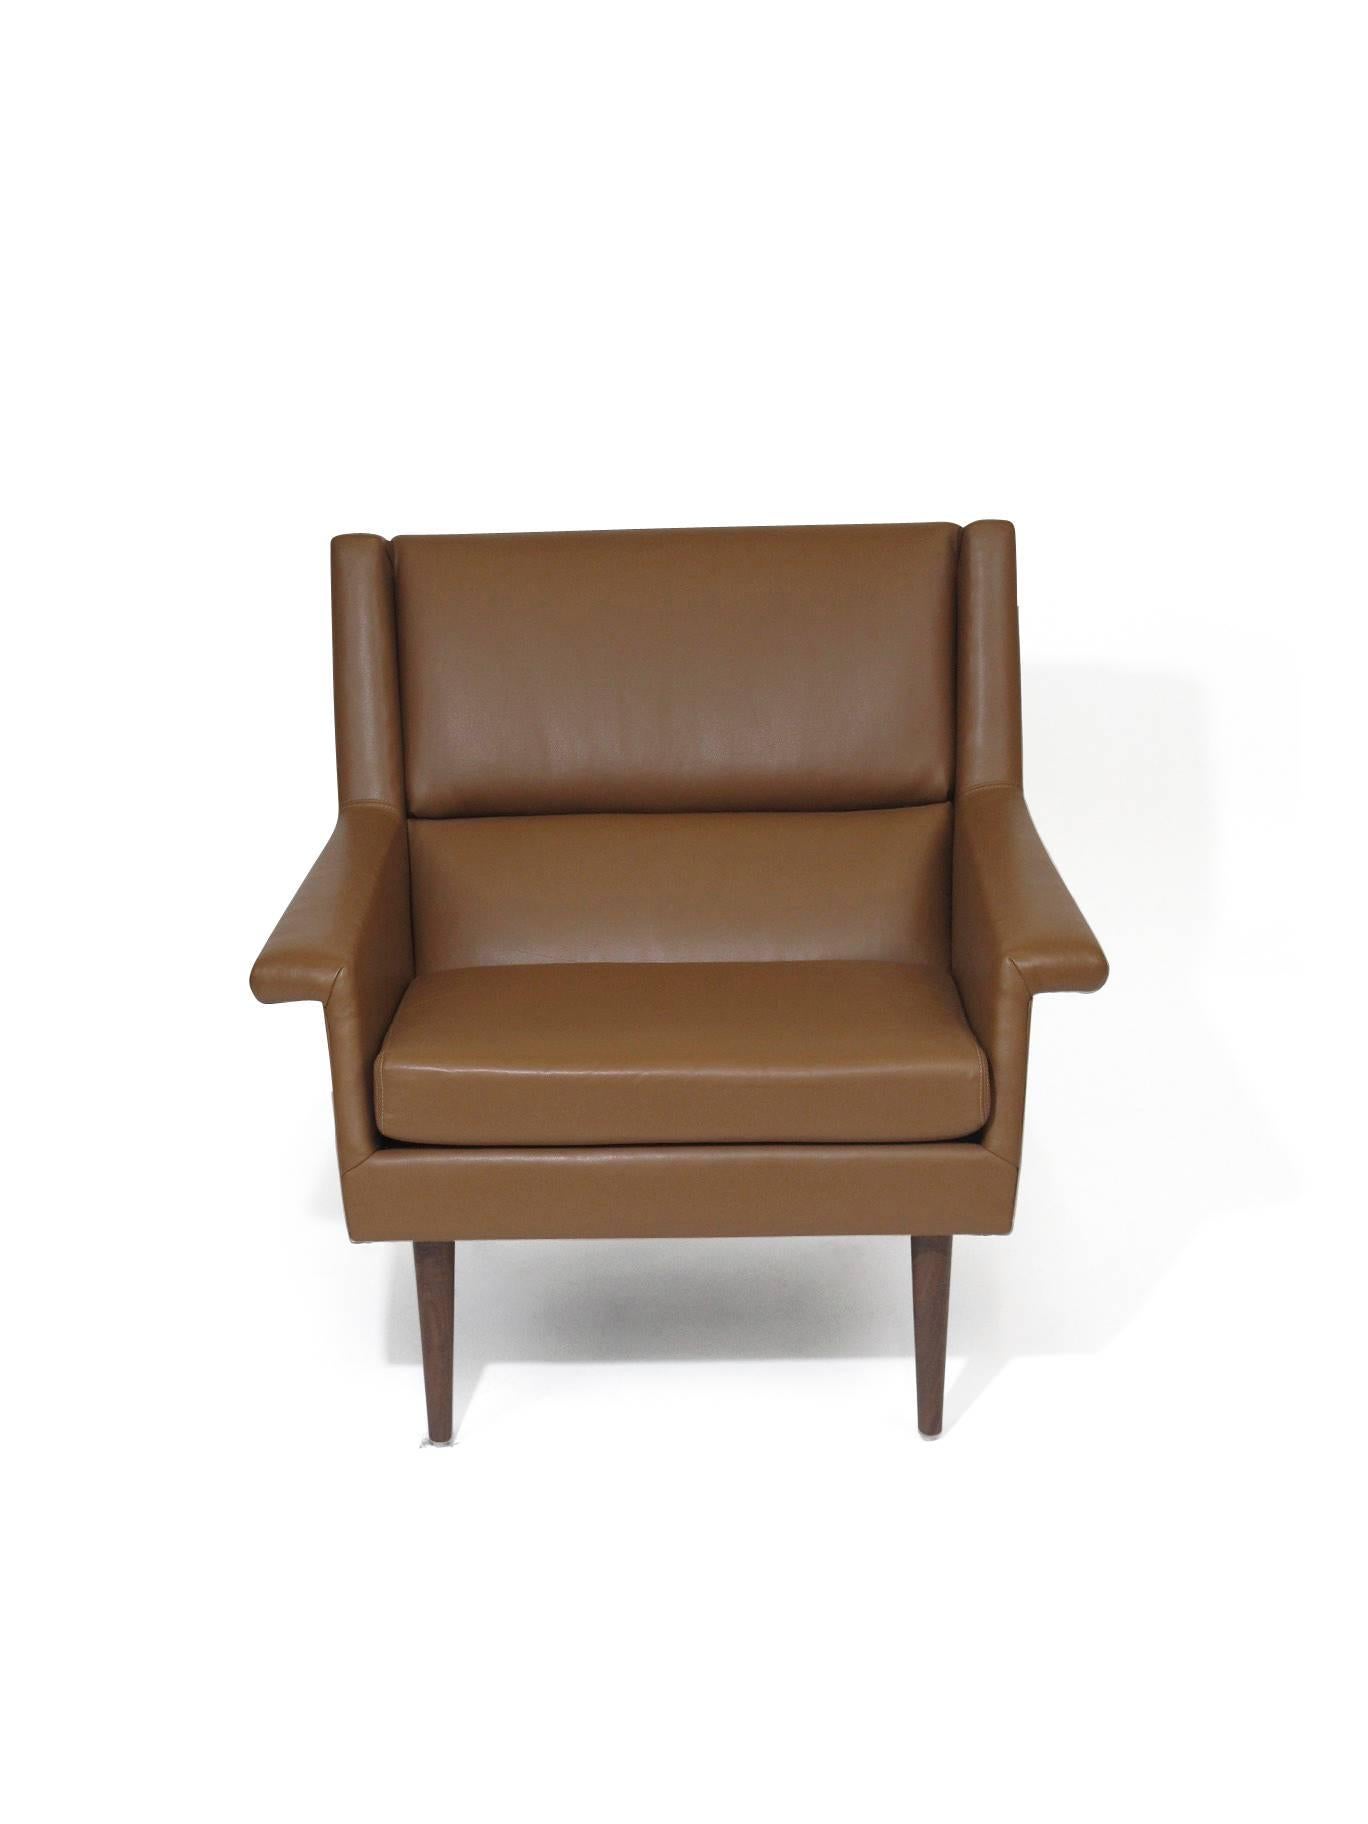 American Milo Baughman for Thayer Coggin Brown Leather Lounge Chair